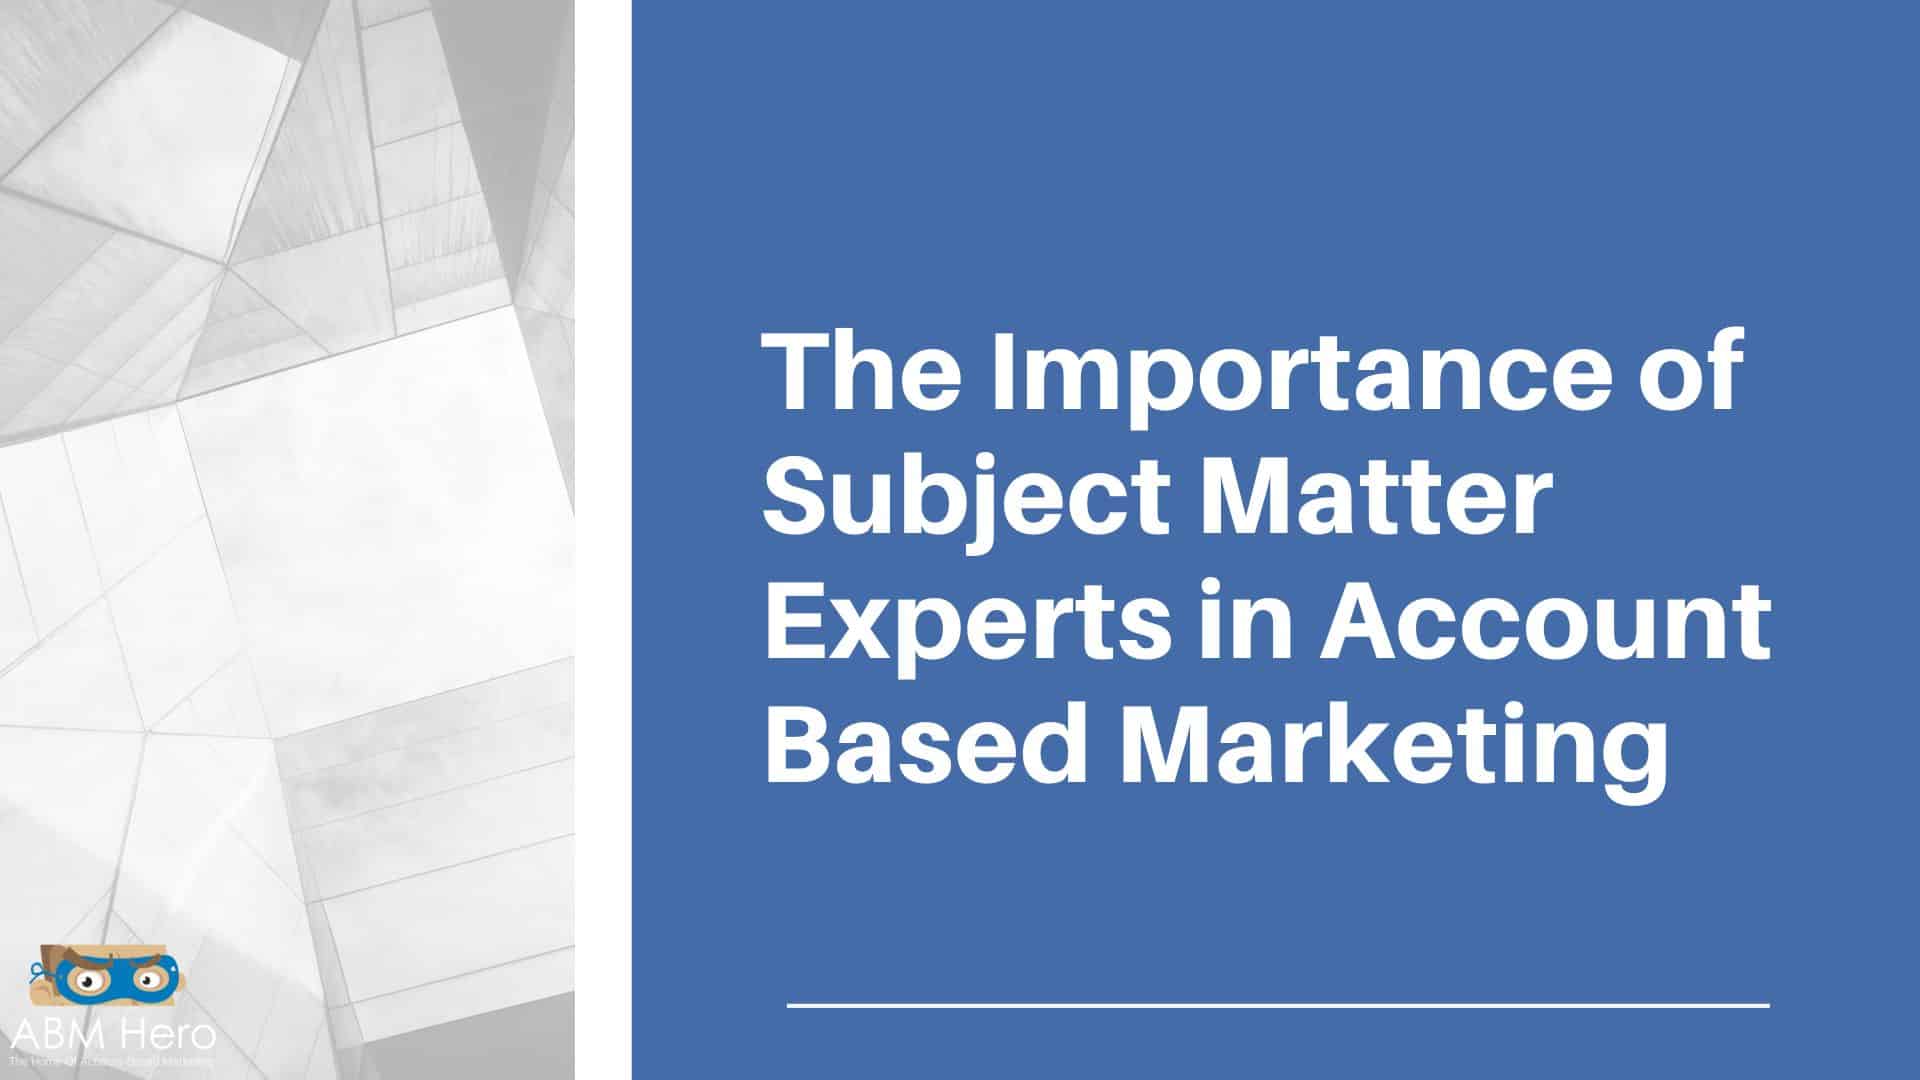 You are currently viewing The Importance of Subject Matter Experts in Account Based Marketing